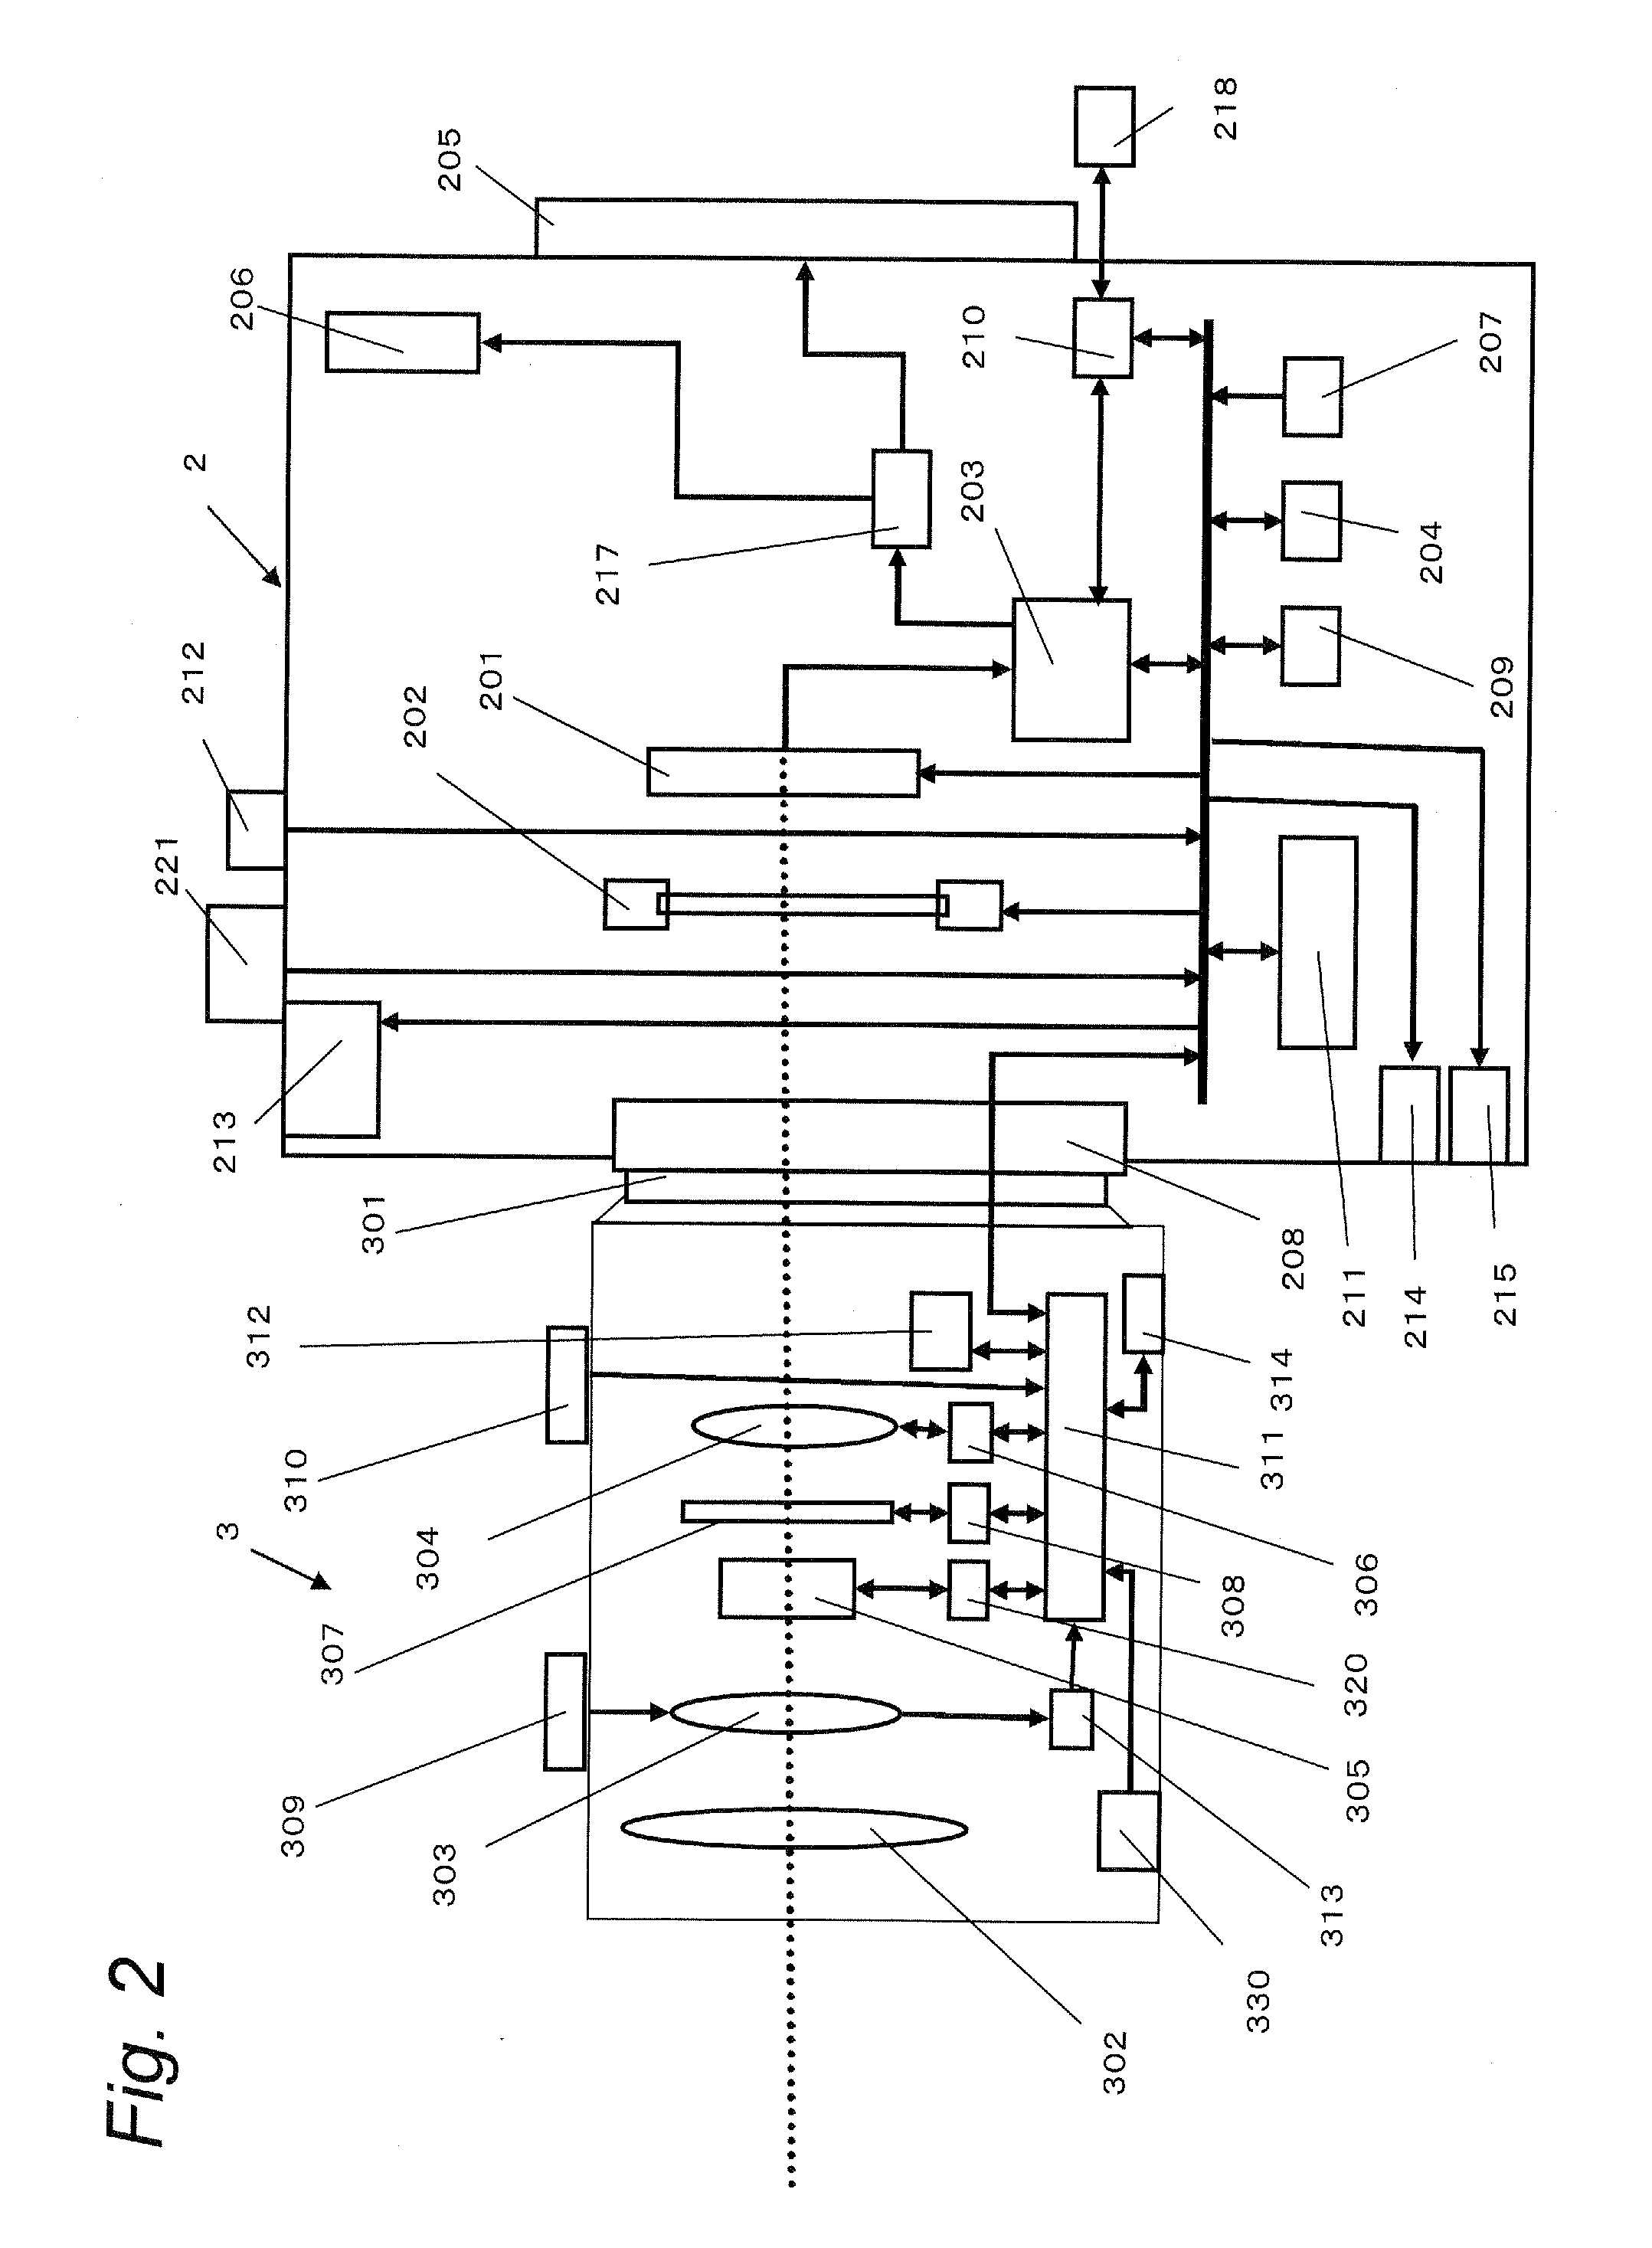 Imaging apparatus and camera system